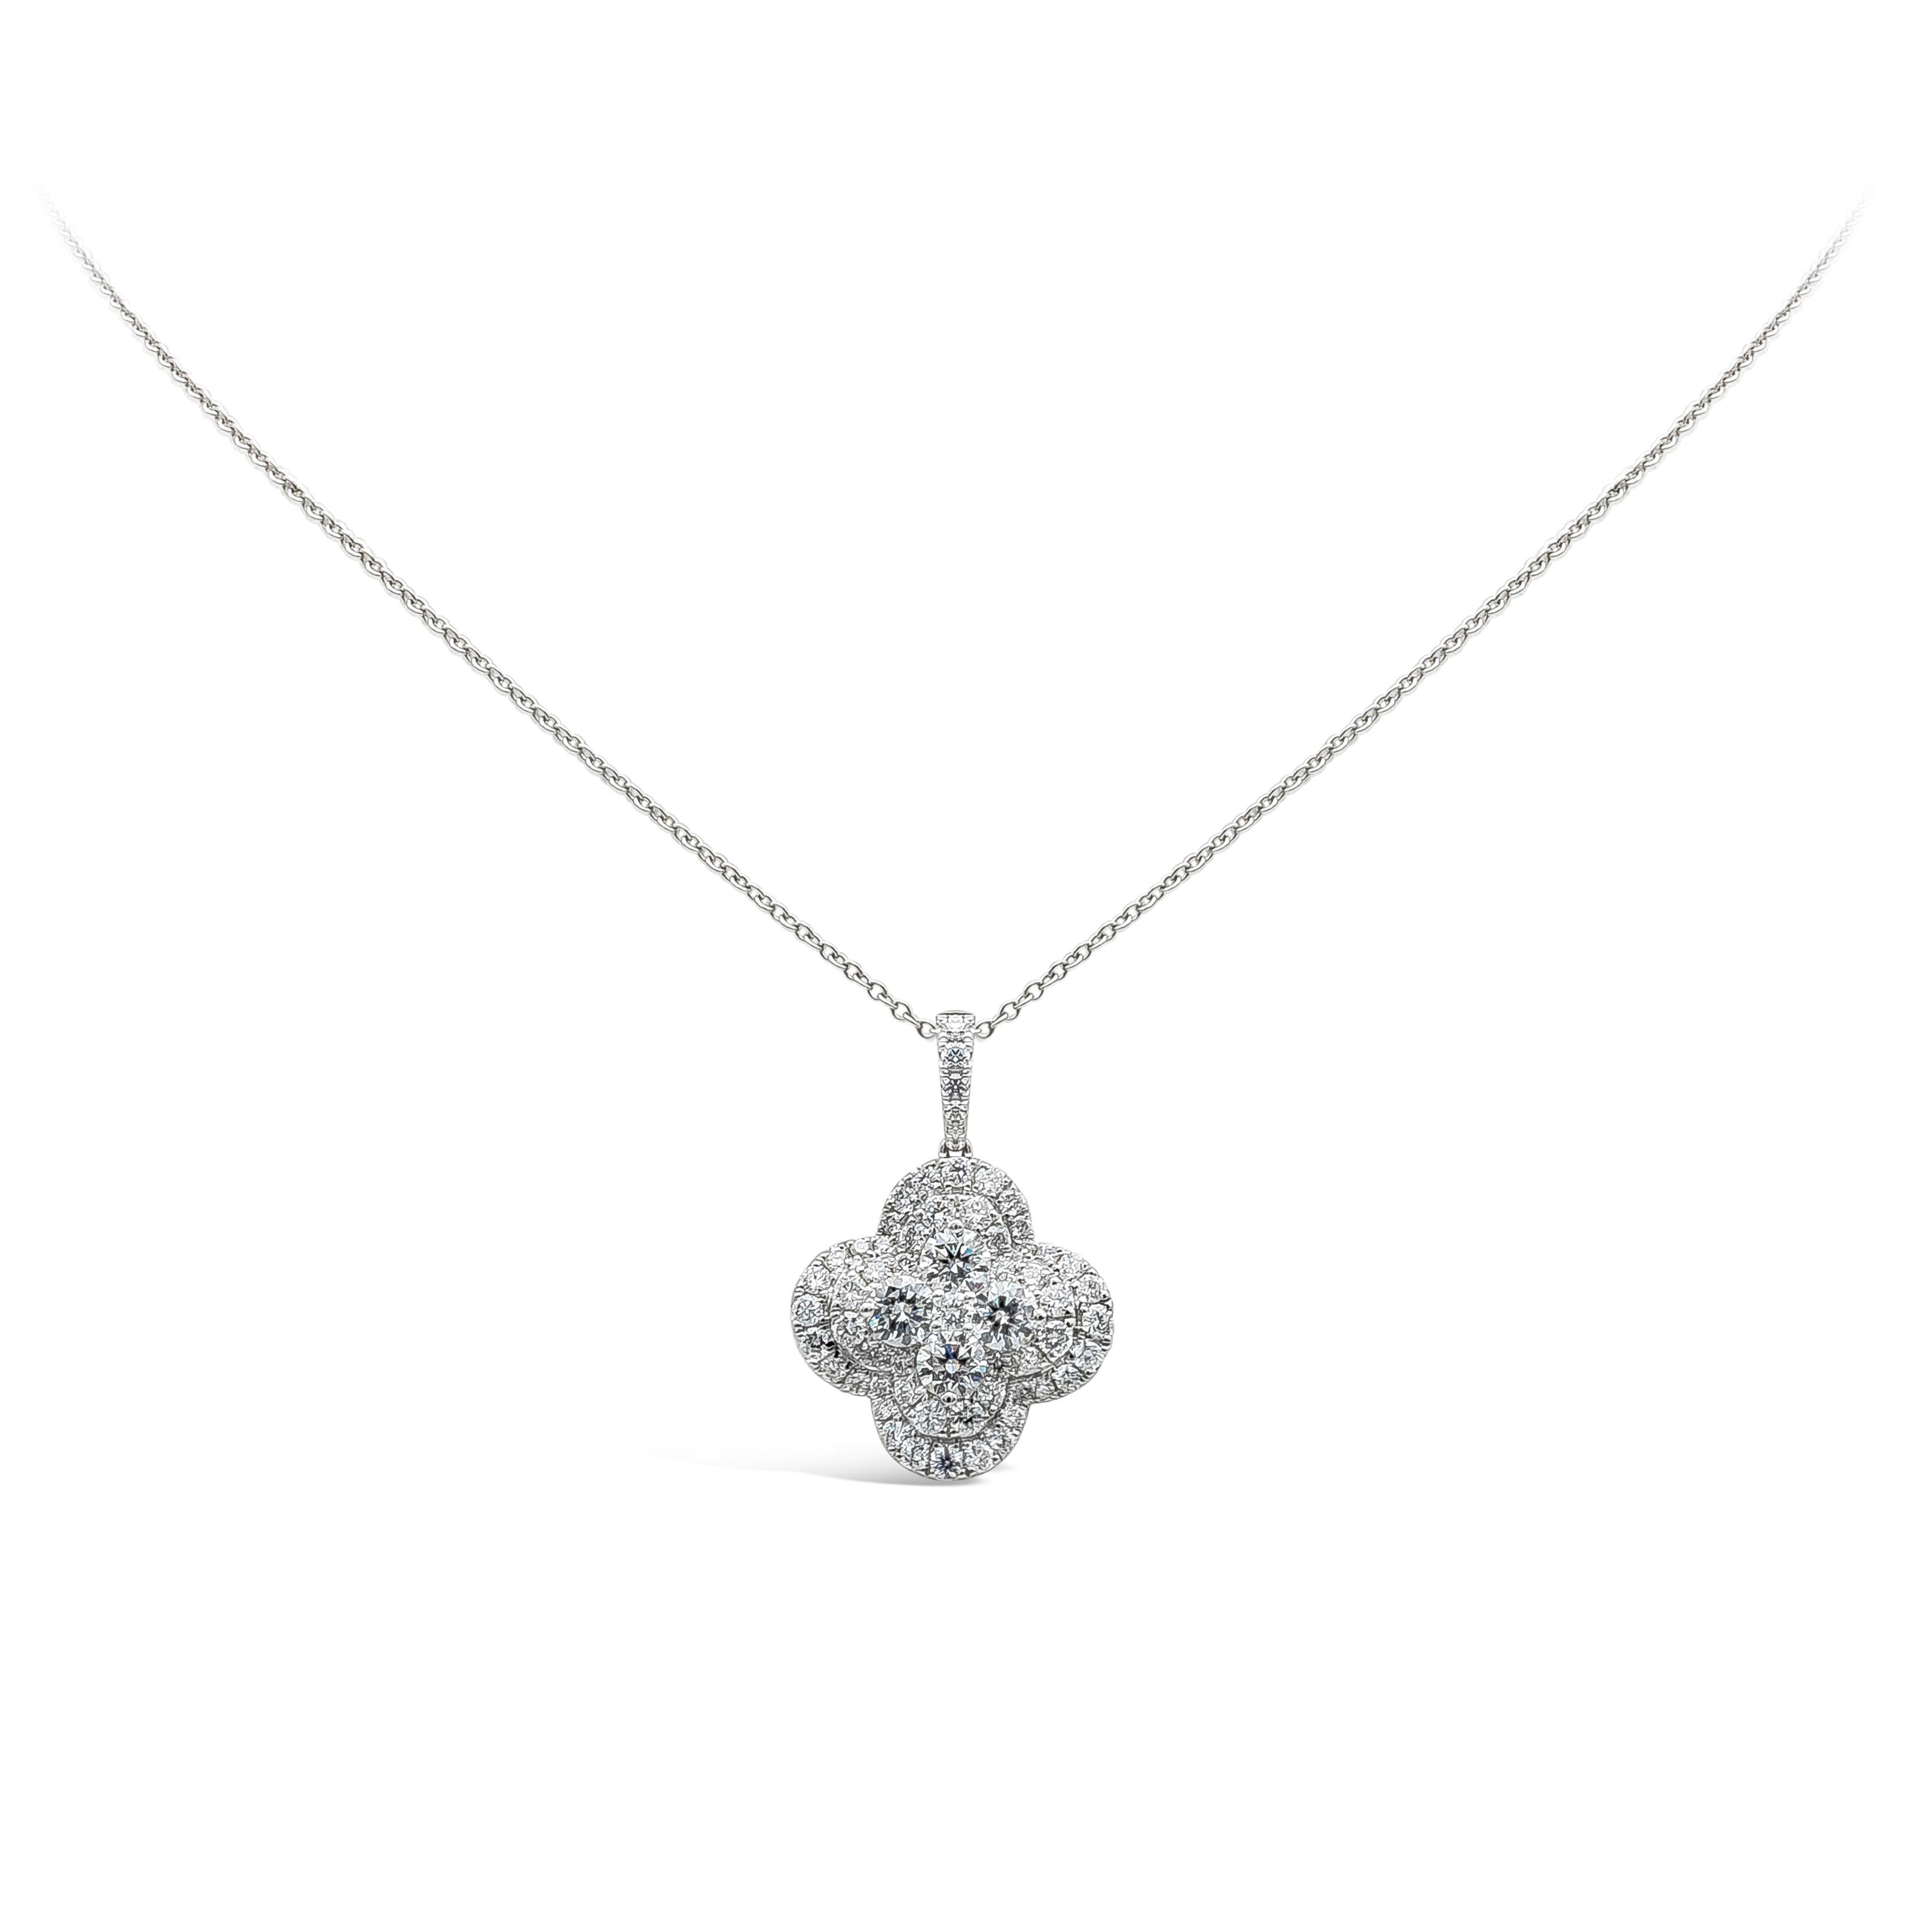 This timeless clover shape pendant necklace features 4 pieces of brilliant round shape diamonds weighing 0.76 carats total, F color and SI1 in clarity in the center. Surrounded by 58 pieces of brilliant round diamonds weighing 0.81 carat total, F